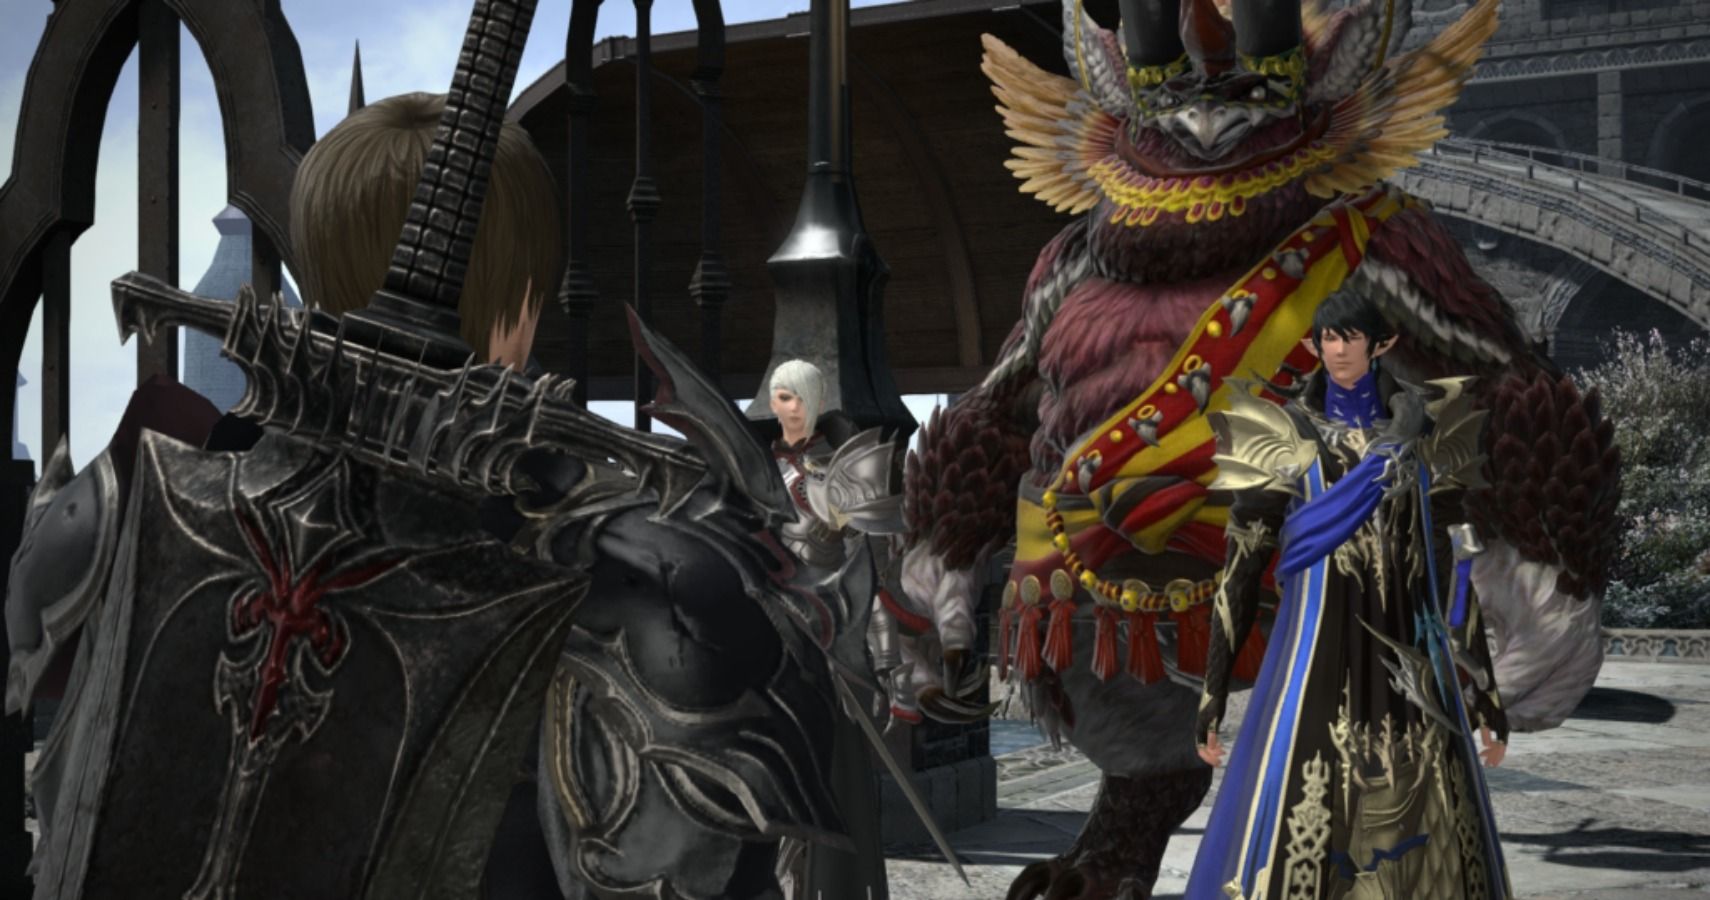 Final Fantasy XIV brings back old characters to patch 5.4